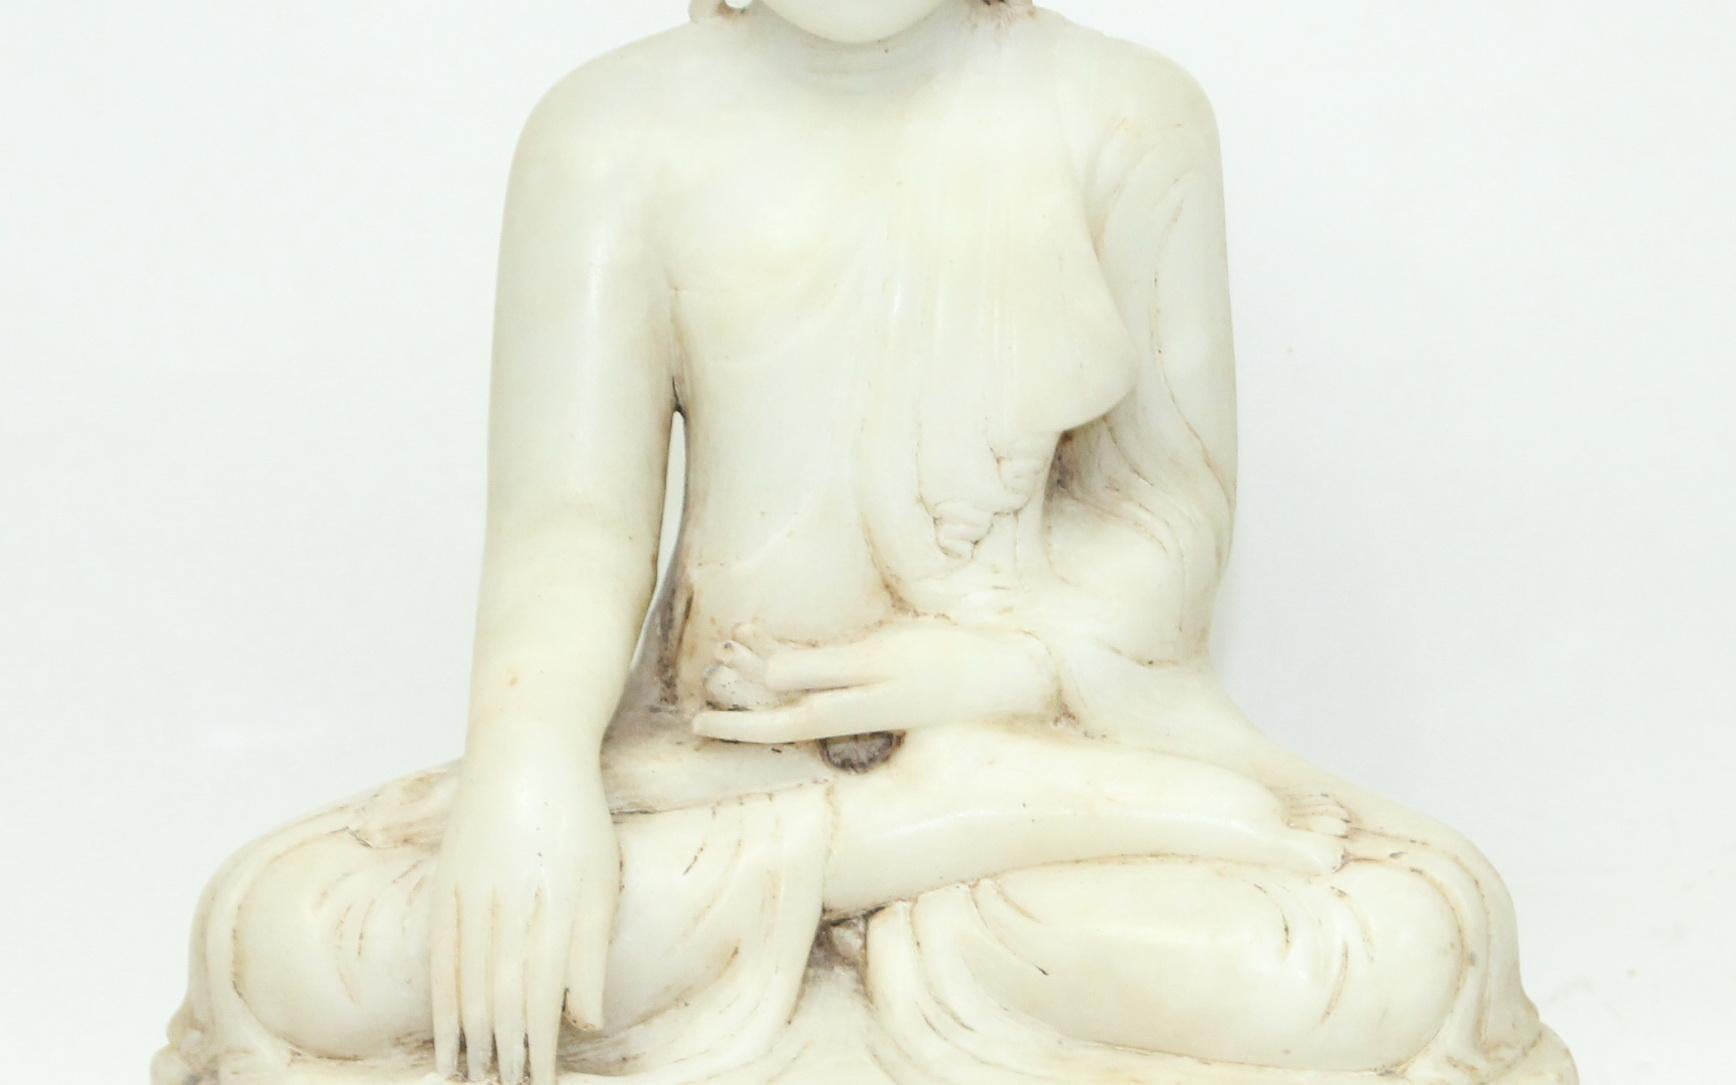 Hand-Carved Antique 19th Century Burmese Alabaster Seated Buddha Sculpture, Mandalay Style